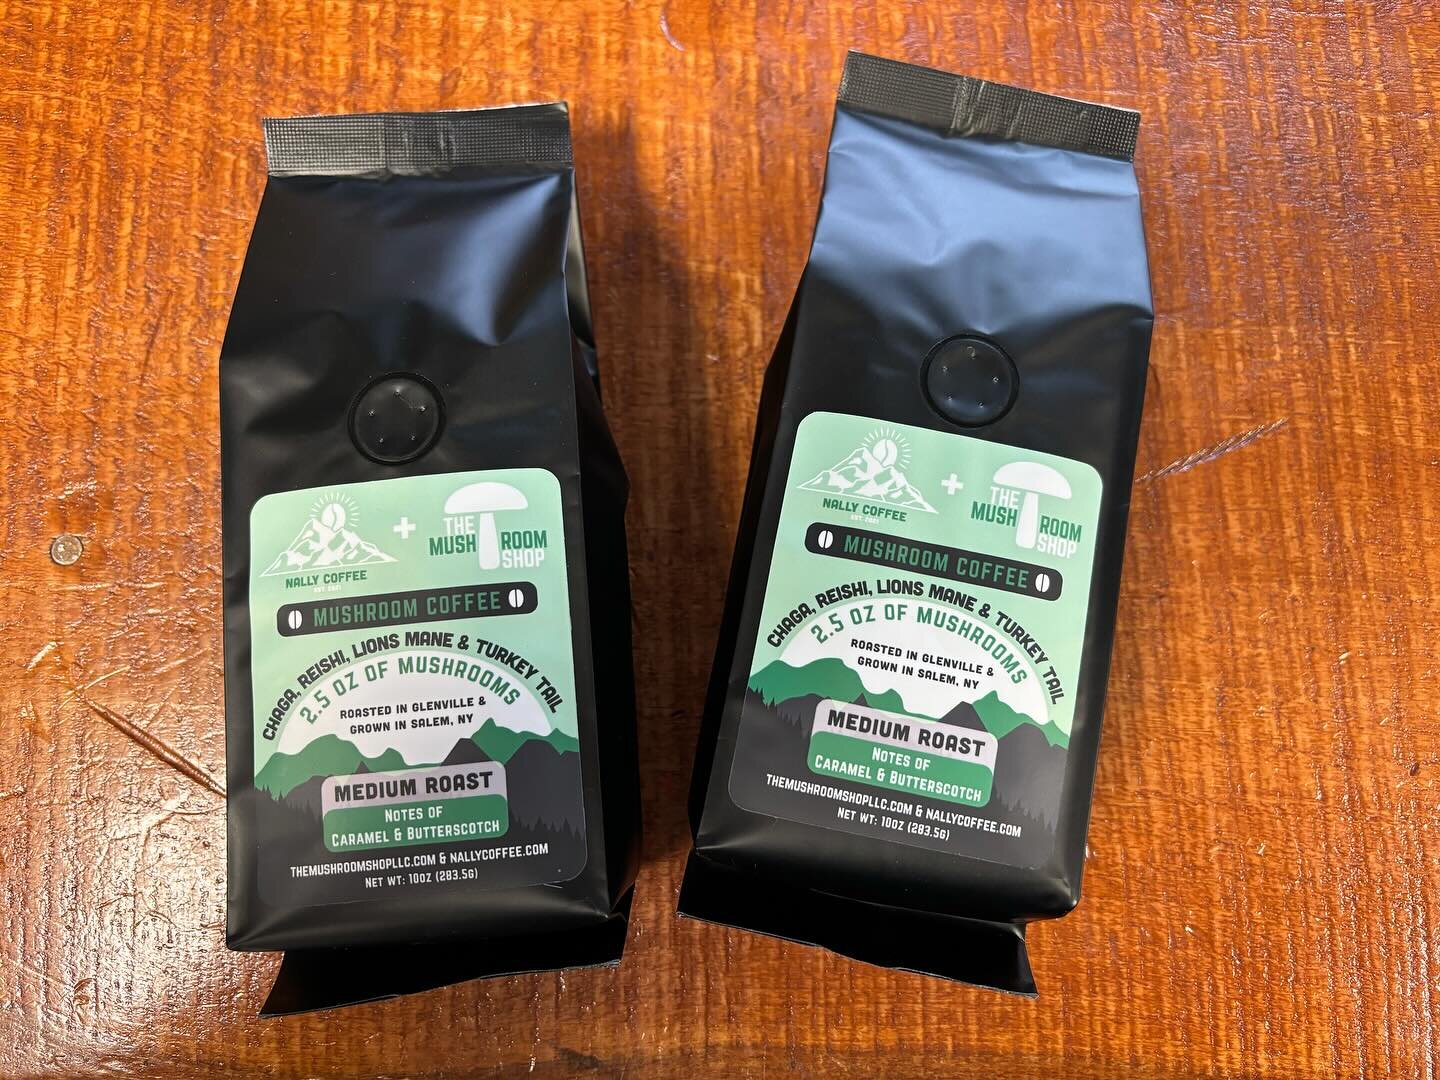 @nallycoffee is collaborating with @themushroomshopllc to create this new mushroom infused coffee blend! 

Infused with Chaga, Reishi, Lions Mane, and Turkey Tail mushrooms, it offers many health benefits! 

We only have 2 in stock, at $25 each for a